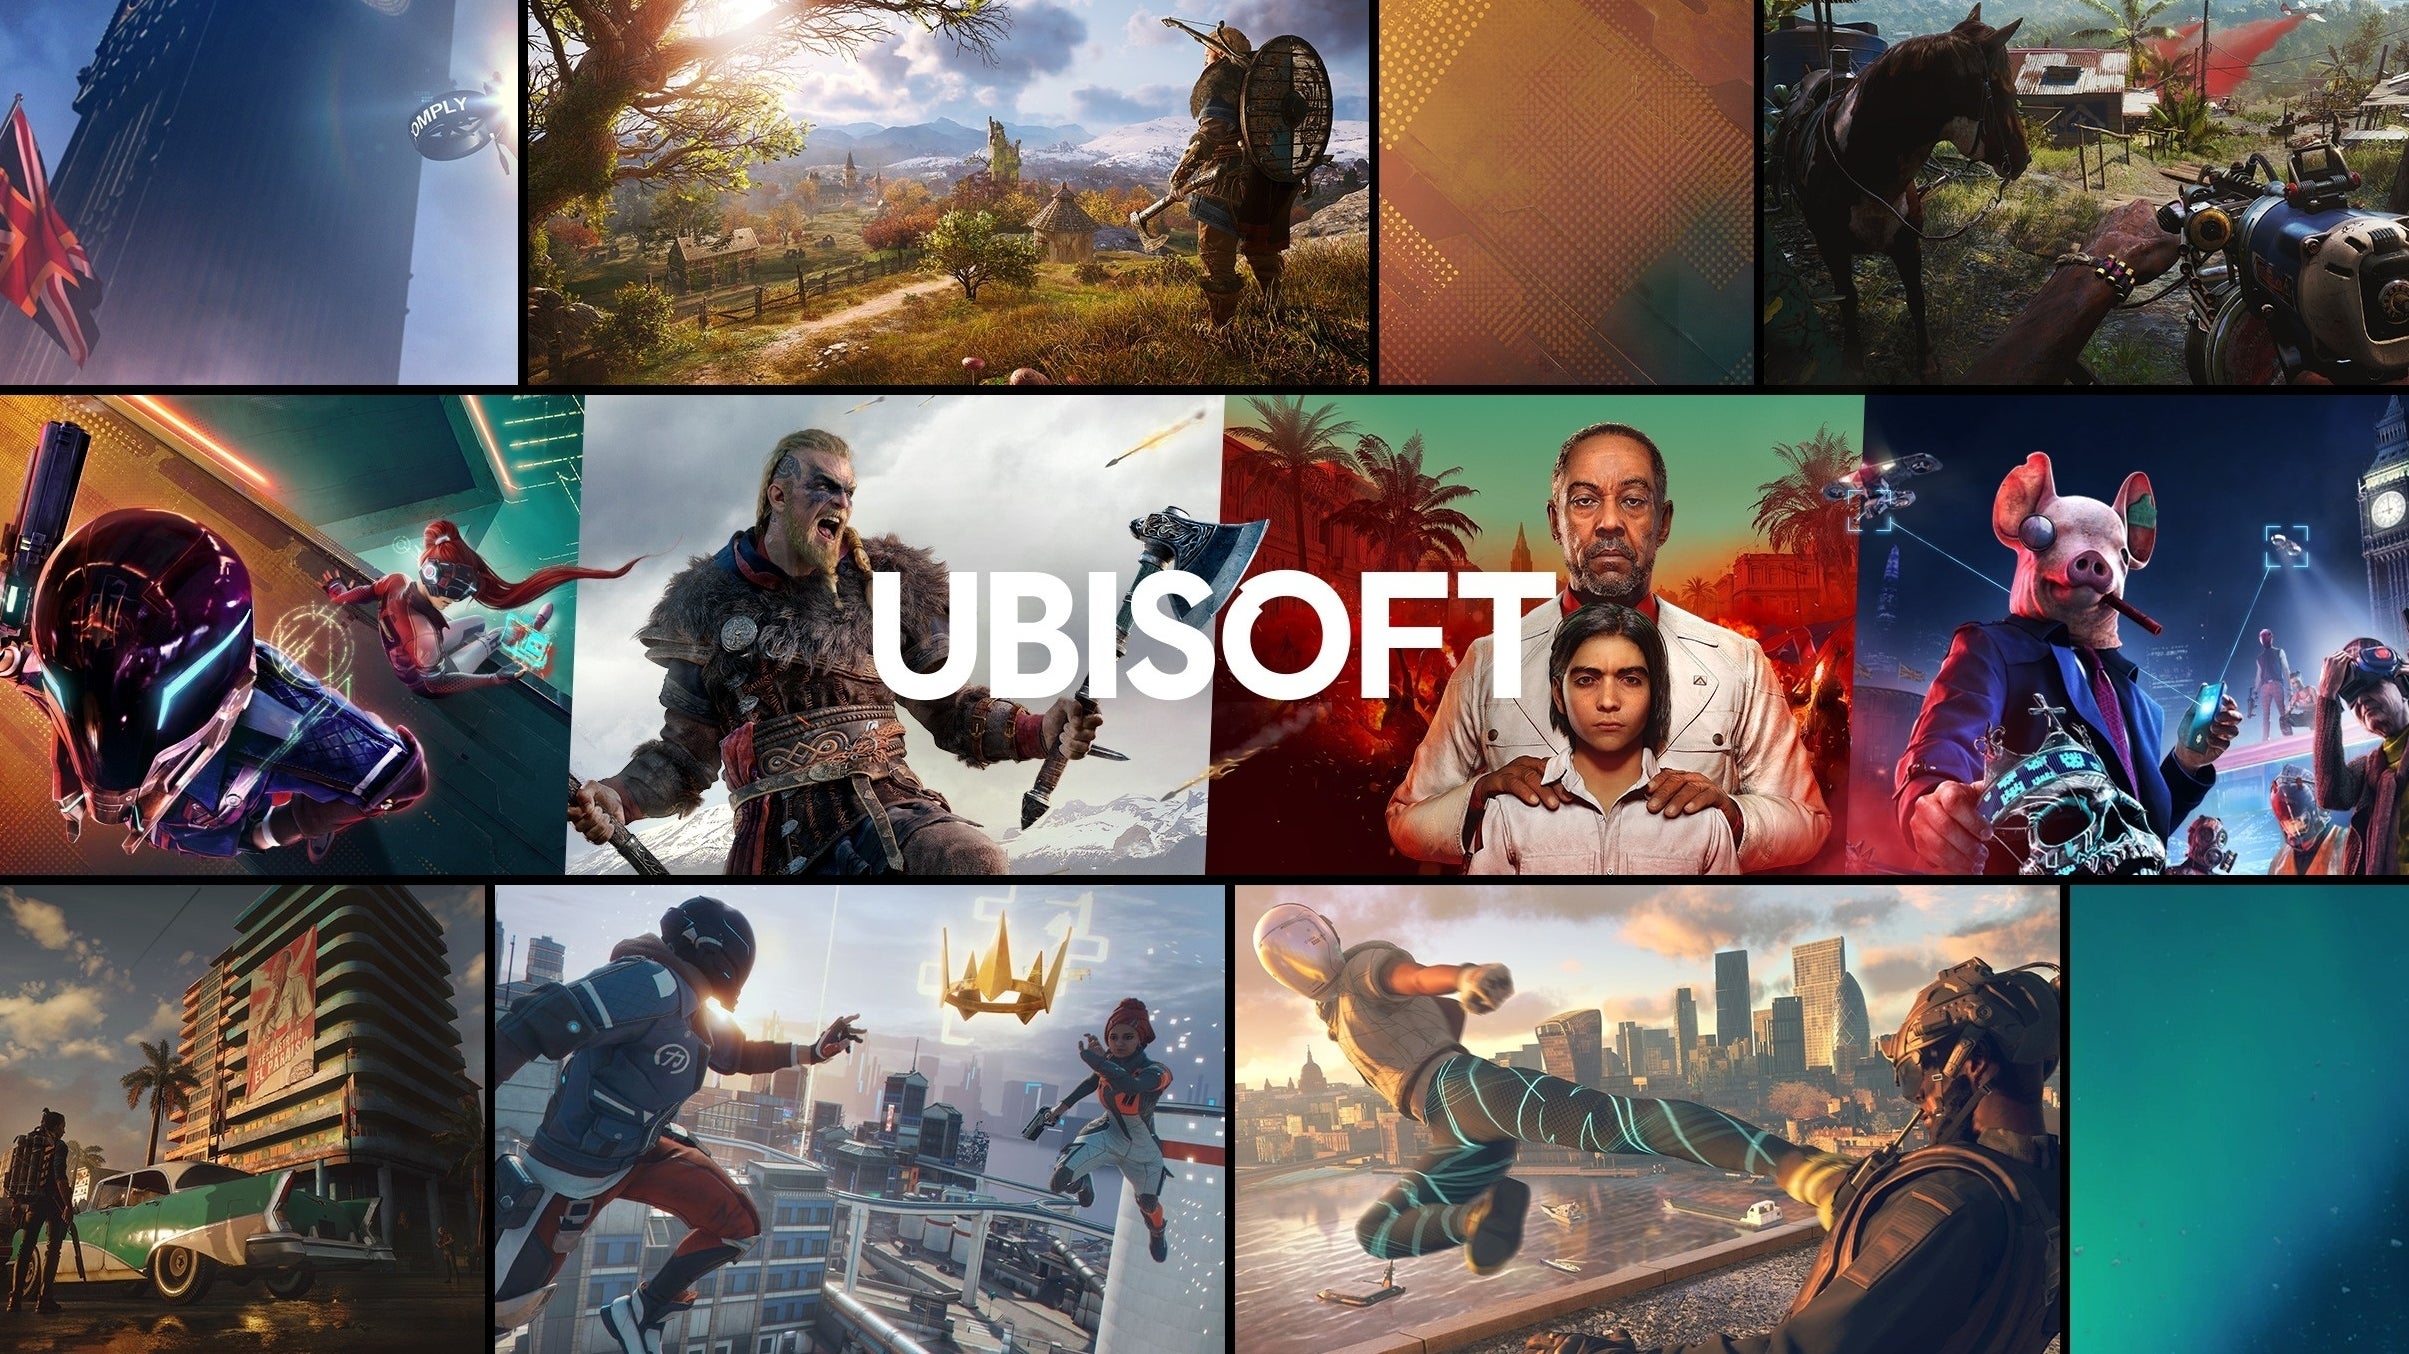 Image for Ubisoft won't abandon paid AAA games while making free-to-play versions of core franchises